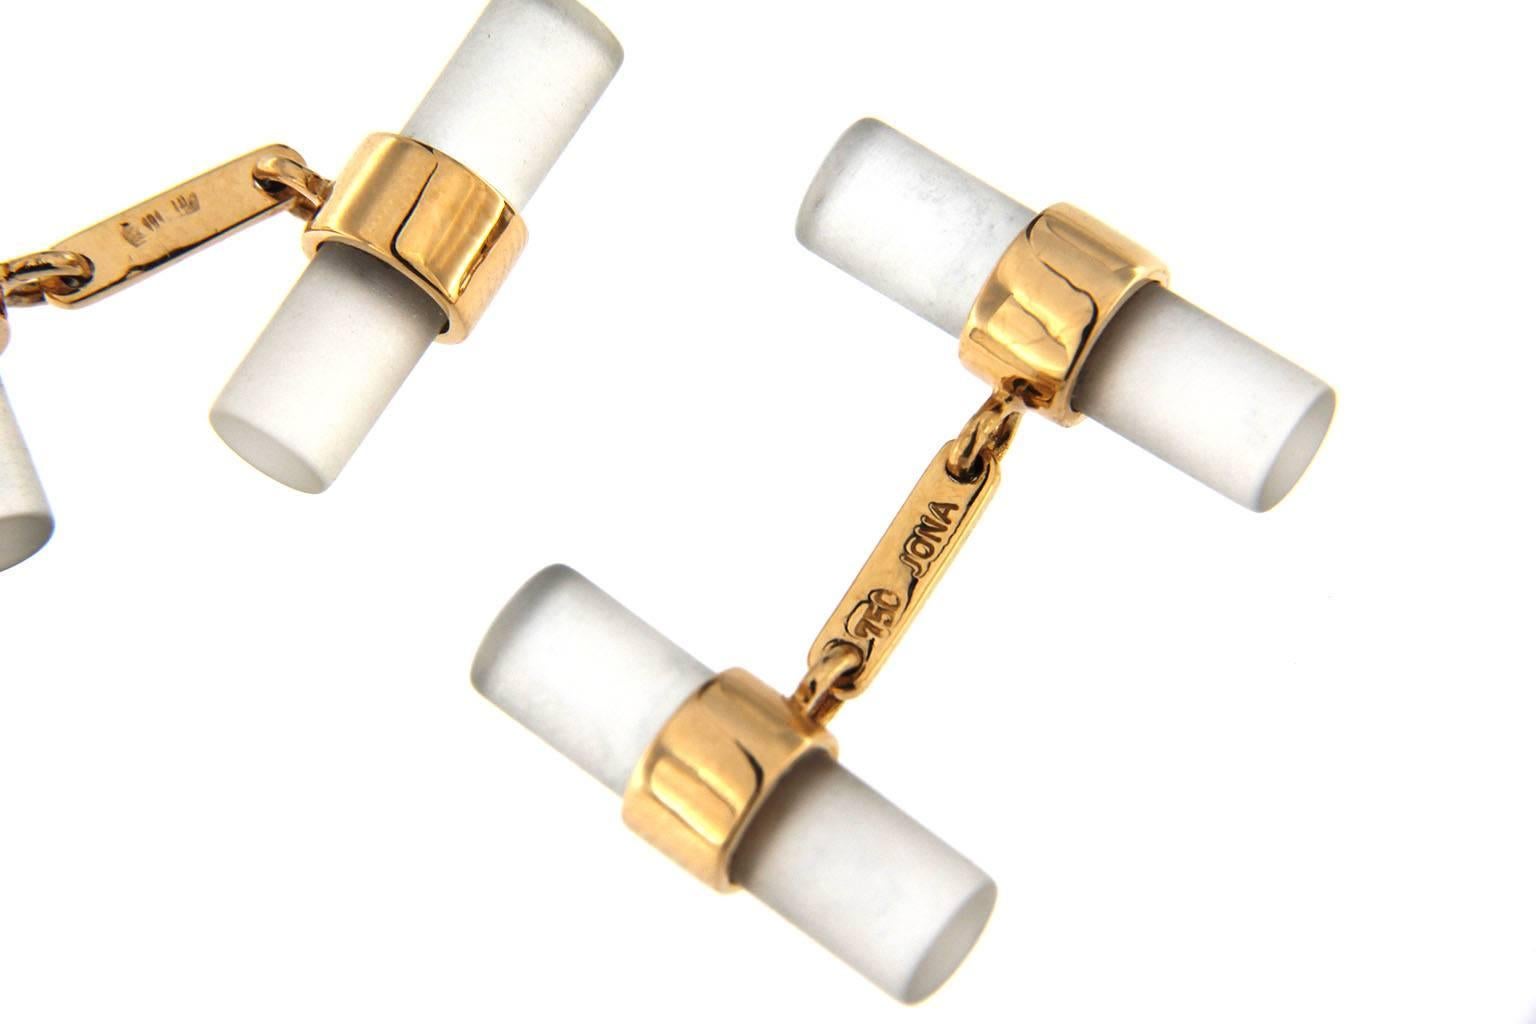 Rock Crystal 18 karat rose gold bar cufflinks, designed by Alex Jona and hand made in Italy. Marked Jona. Dimensions: L x 20.43 mm, Dm x 7.40 mm (each bar) - L x 0.80 in, Dm x 0.29 in.
Alex Jona cufflinks stand out, not only for their special design